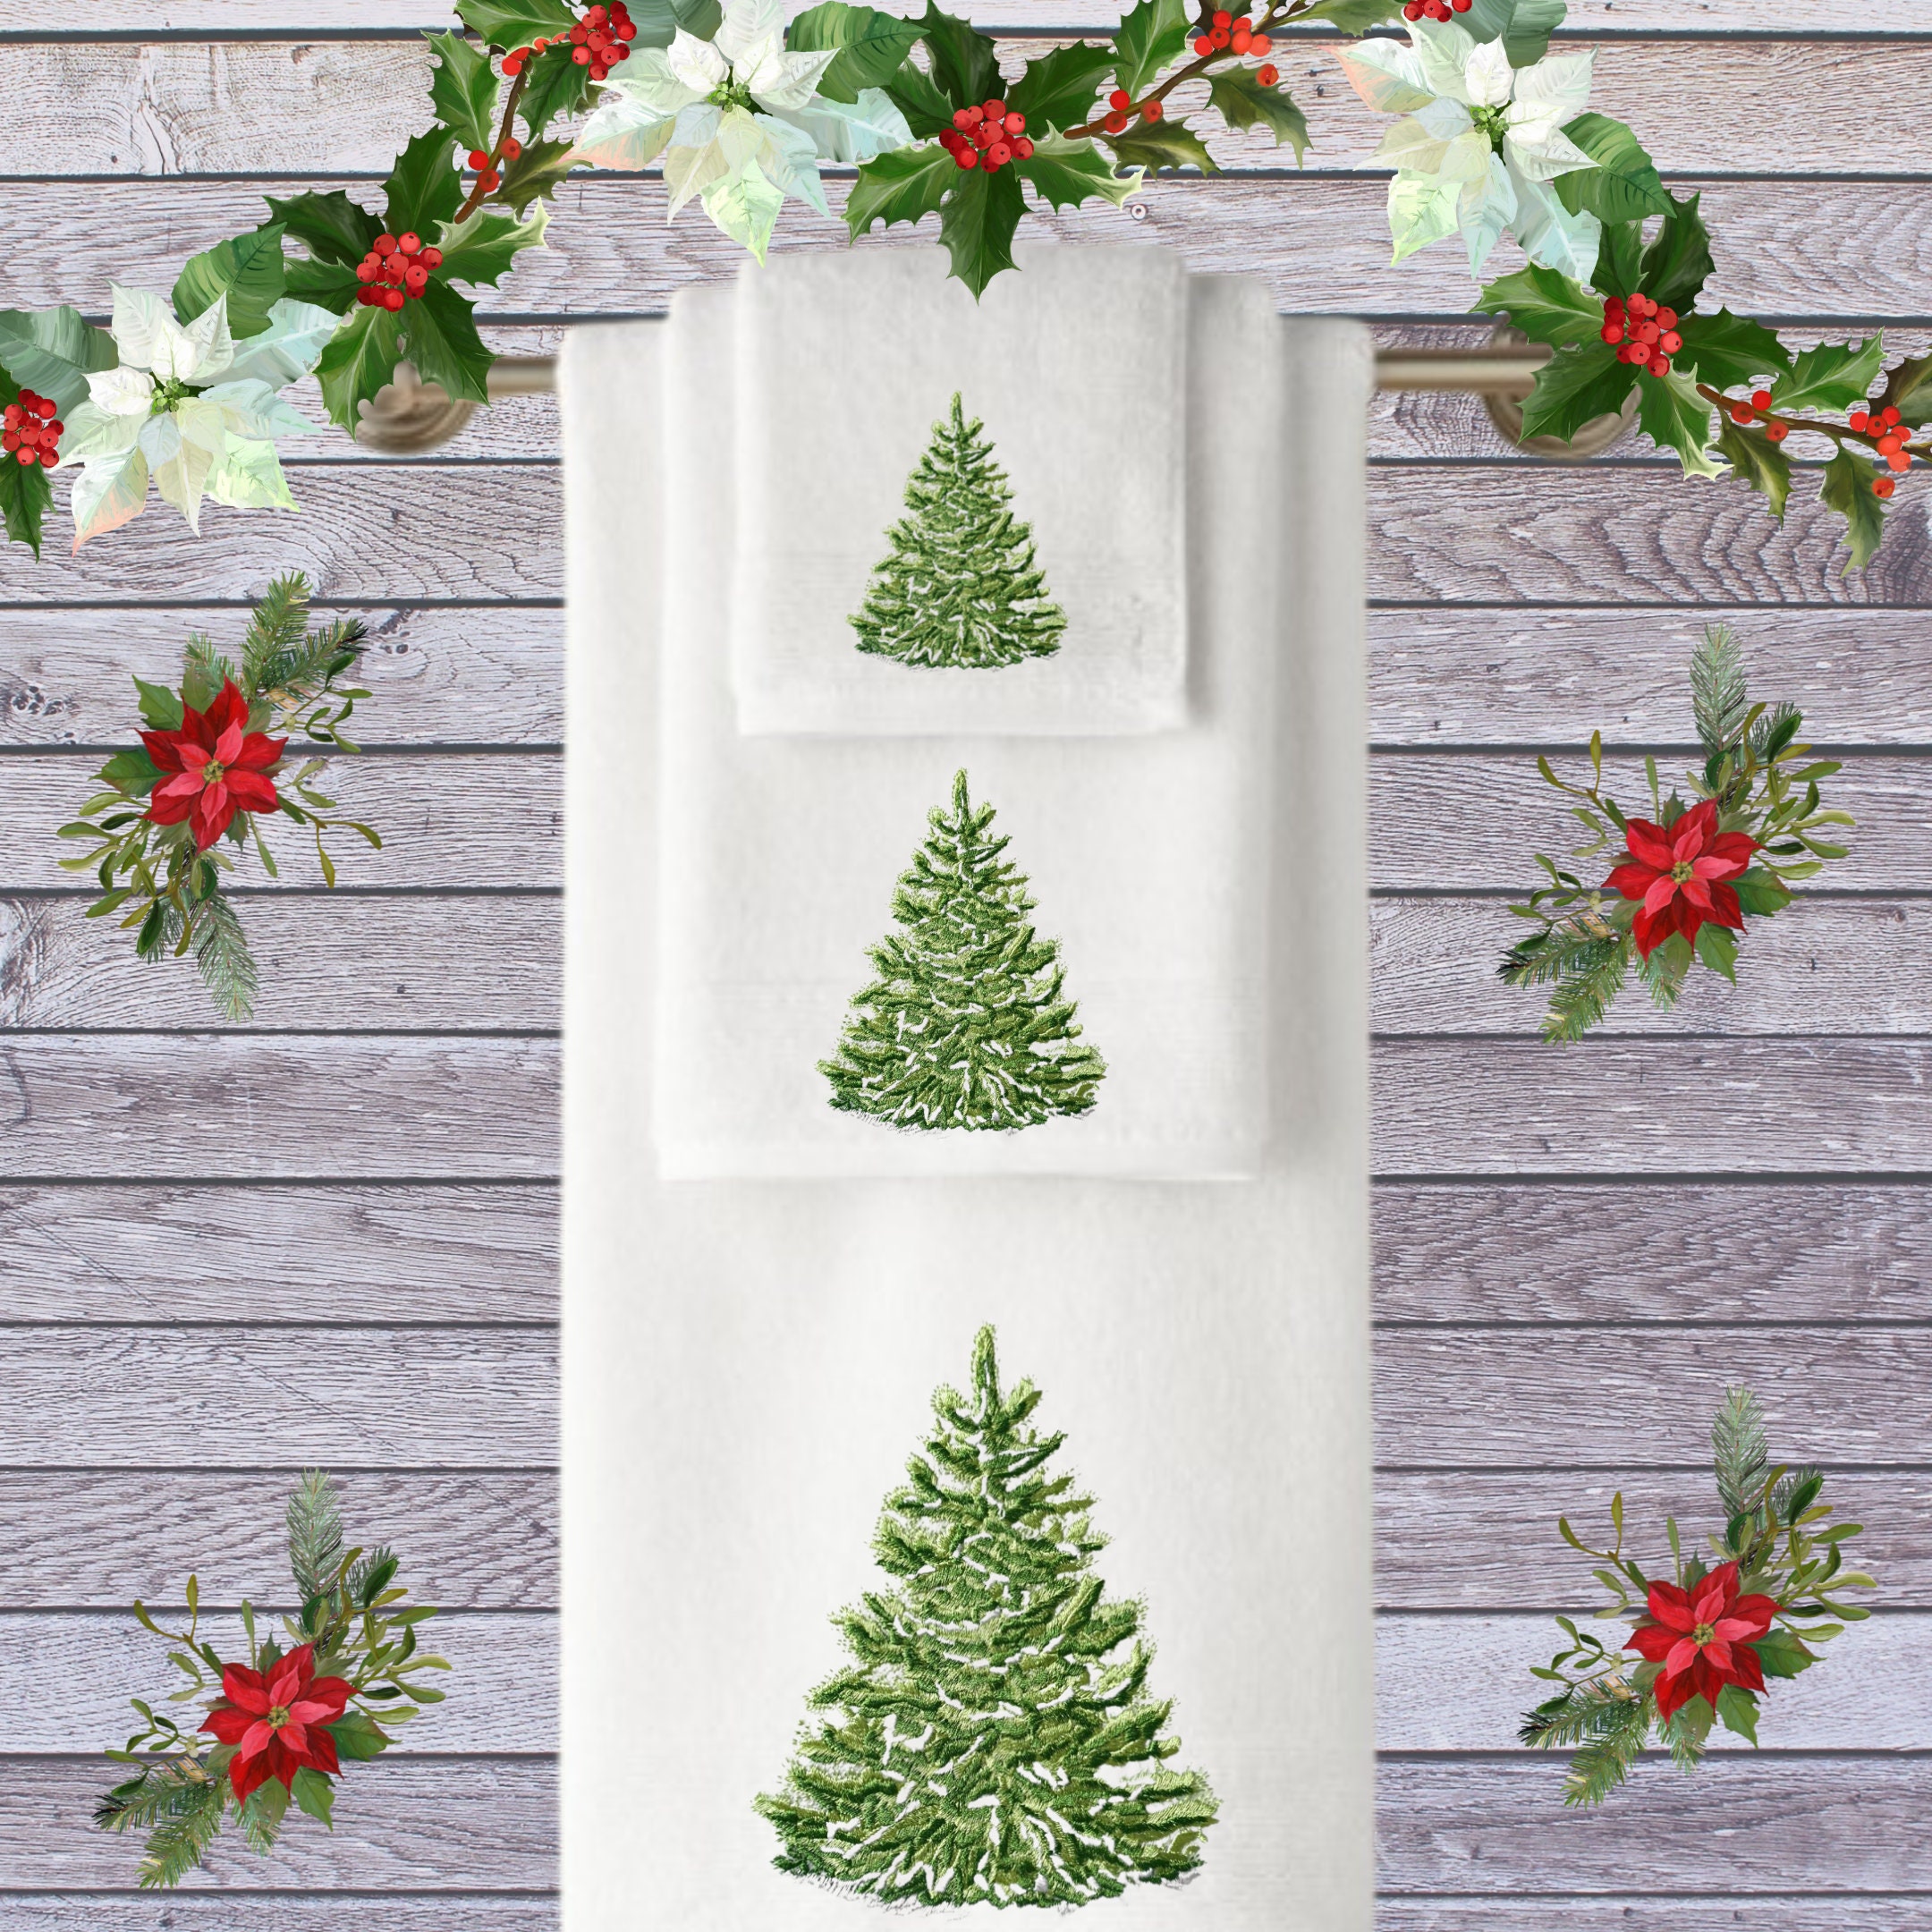 American Soft Linen Christmas Towels Bathroom Set, 2 Packed Embroidered  Decorative 100% Cotton Hand Towels, Dish Towels for Decor Xmas, Merry Hoho